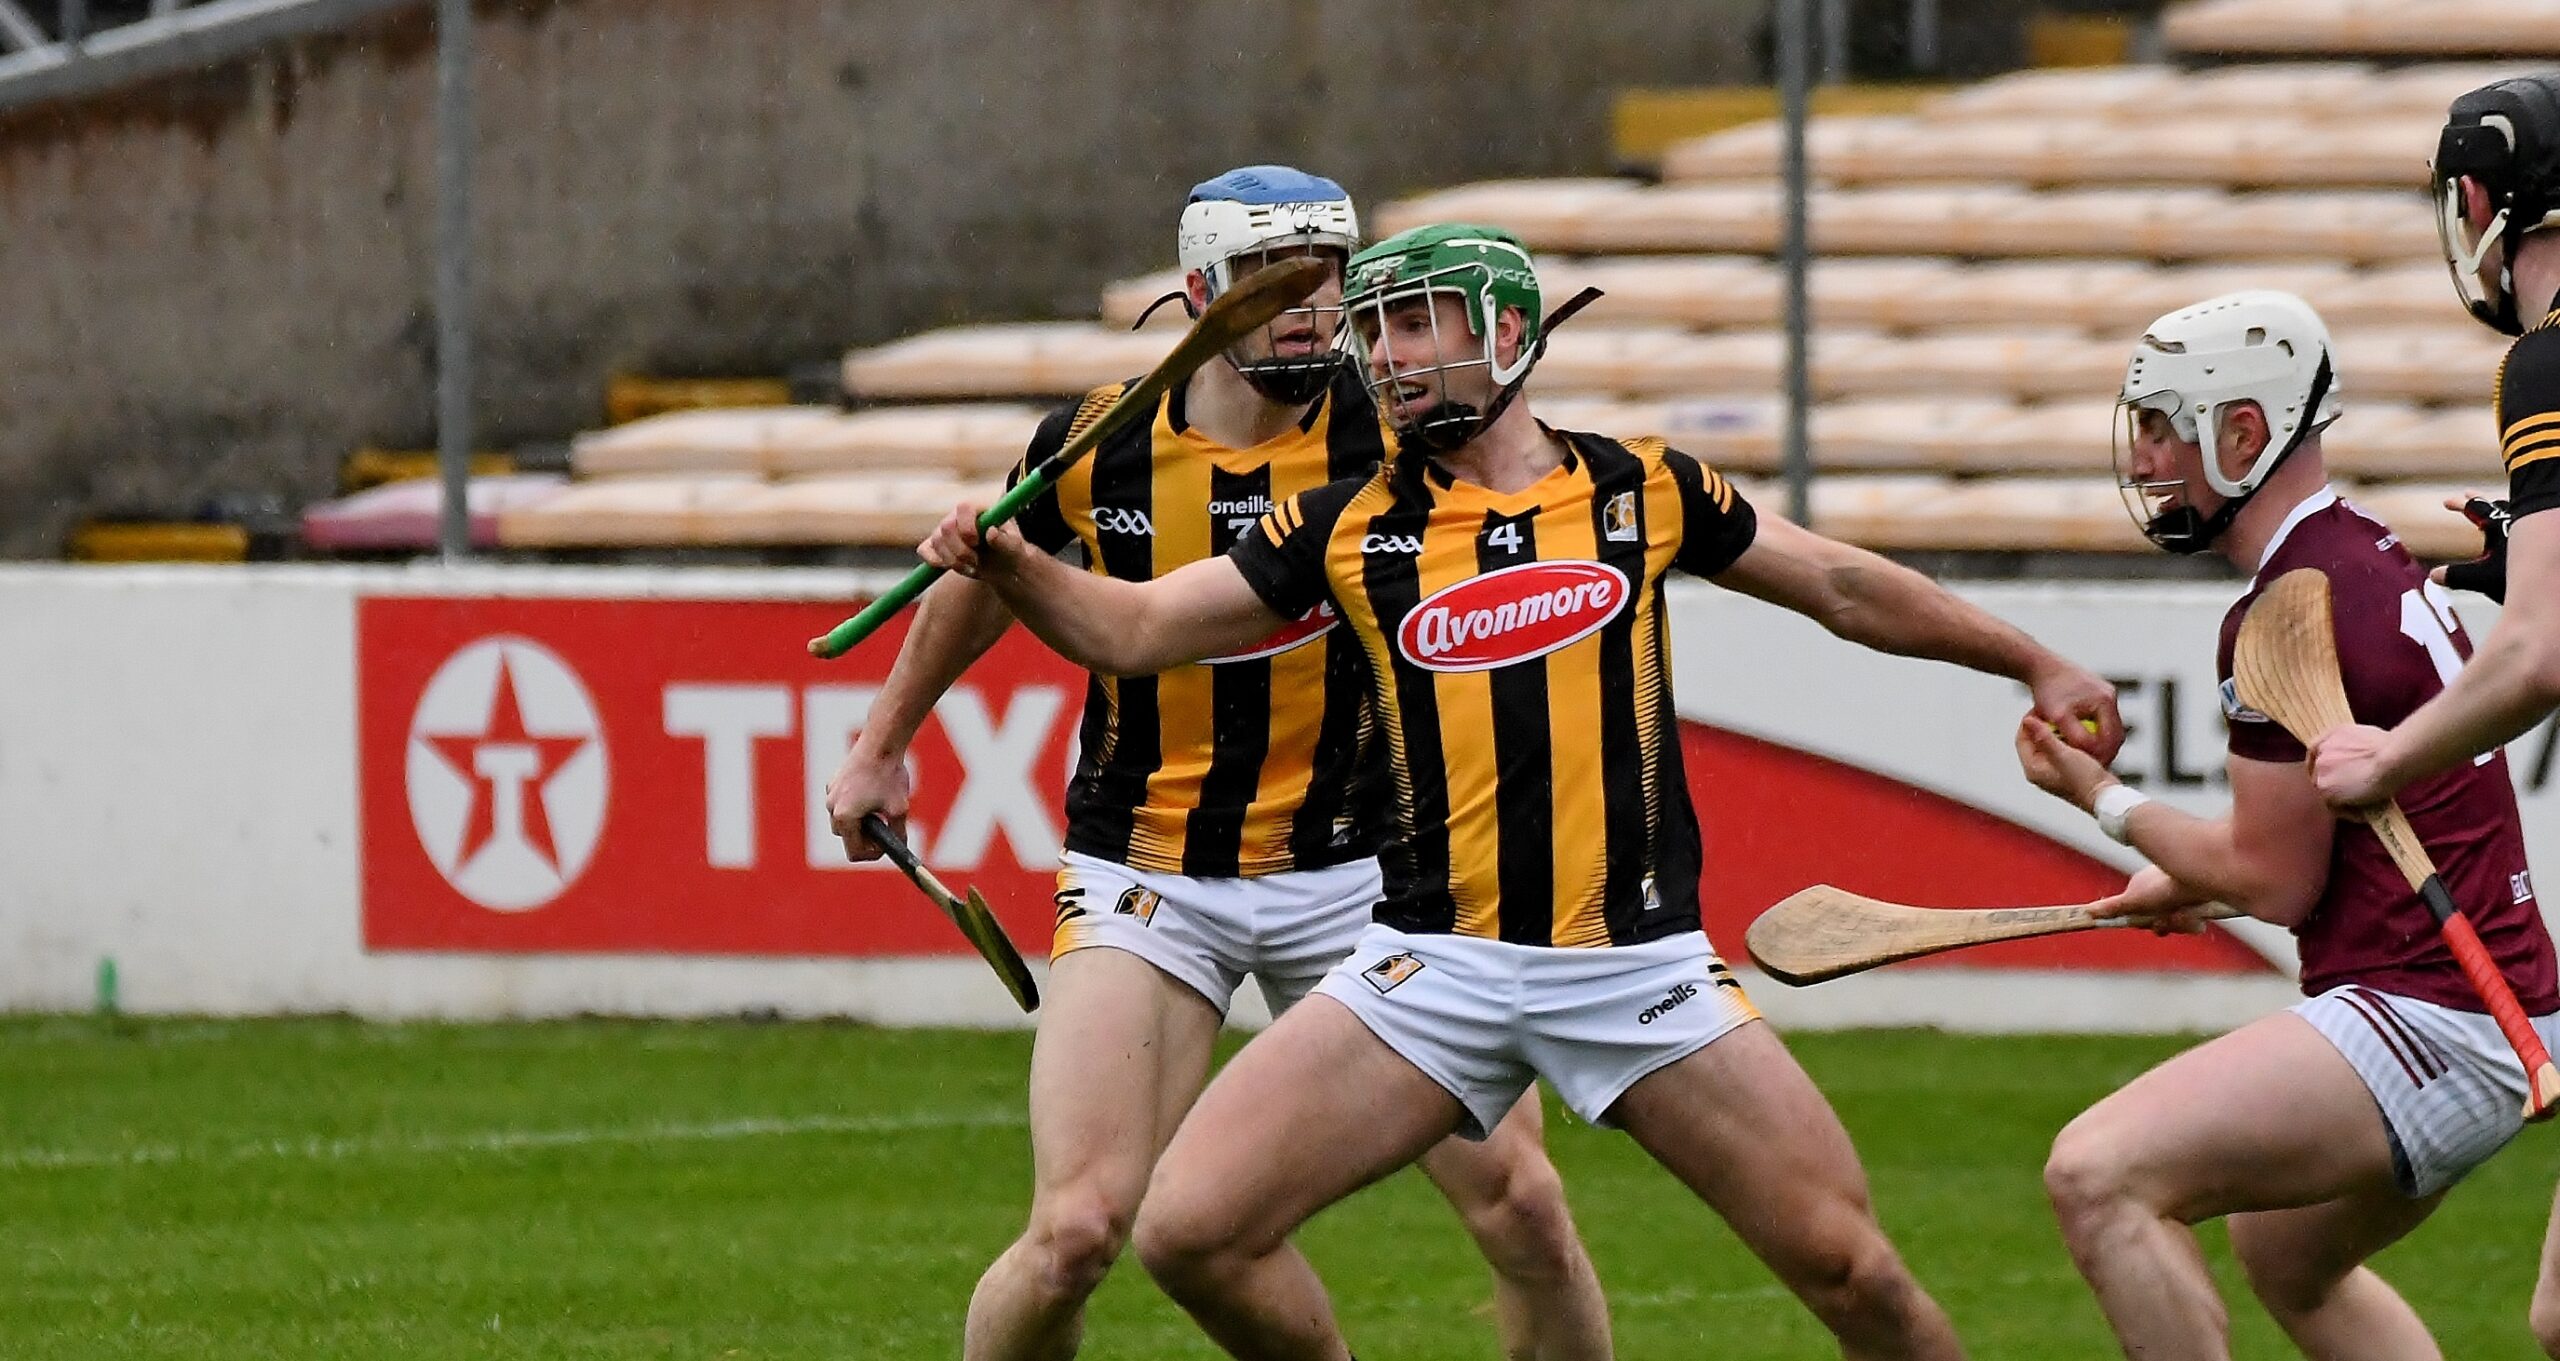 Kilkenny’s 2023 Leinster SHC campaign off to a good start with victory over Westmeath